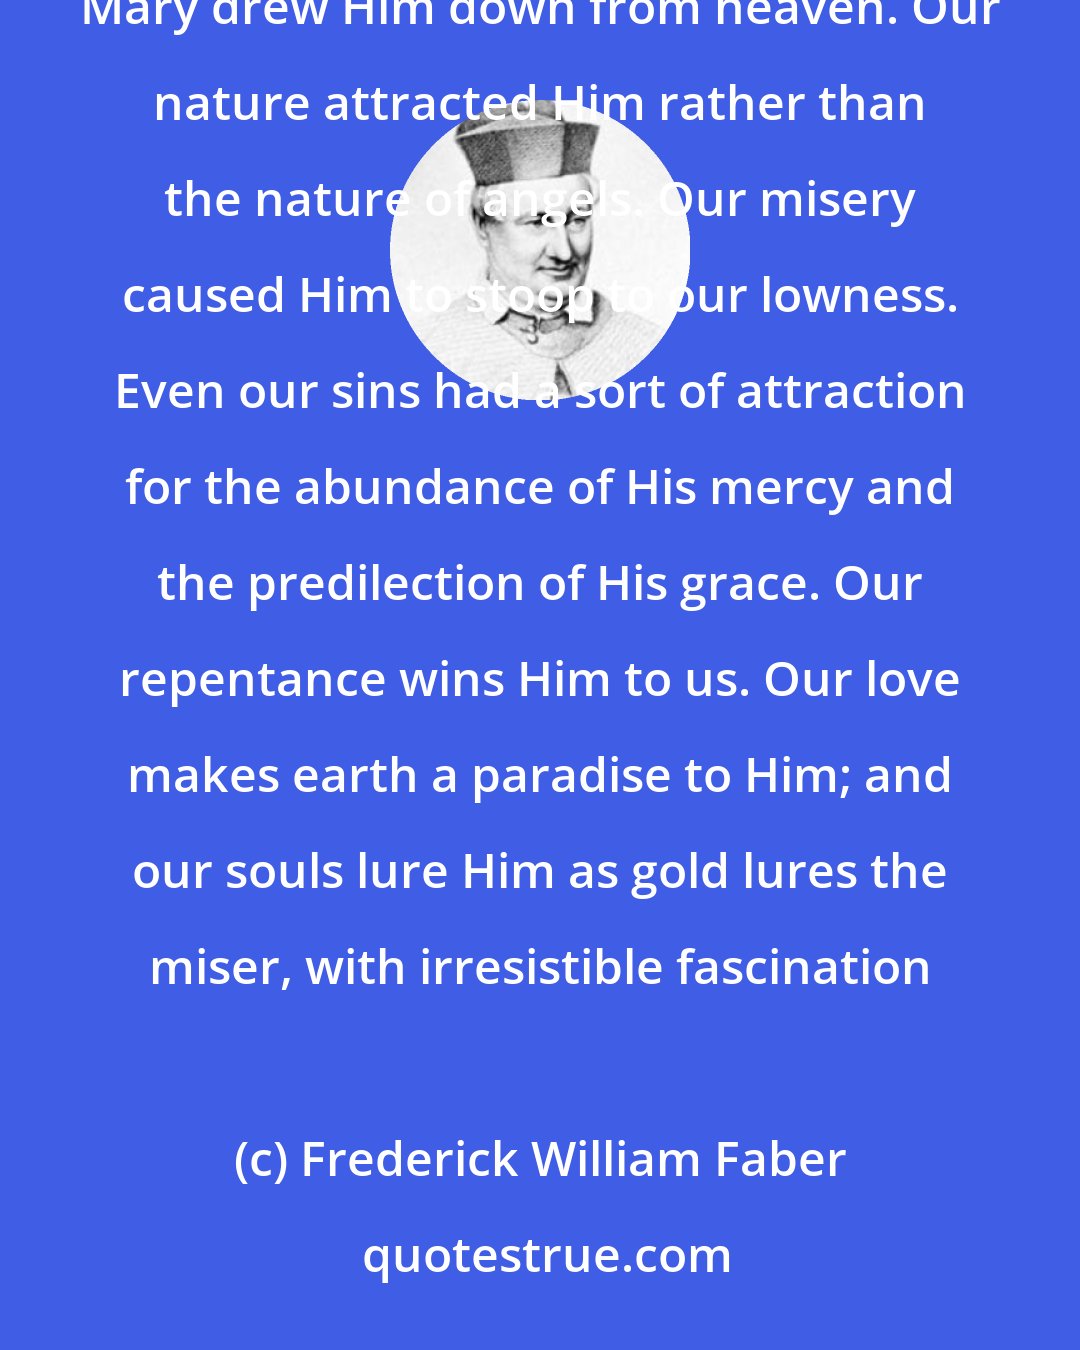 Frederick William Faber: The Blessed Sacrament is the magnet of souls. There is a mutual attraction between Jesus and the souls of men. Mary drew Him down from heaven. Our nature attracted Him rather than the nature of angels. Our misery caused Him to stoop to our lowness. Even our sins had a sort of attraction for the abundance of His mercy and the predilection of His grace. Our repentance wins Him to us. Our love makes earth a paradise to Him; and our souls lure Him as gold lures the miser, with irresistible fascination